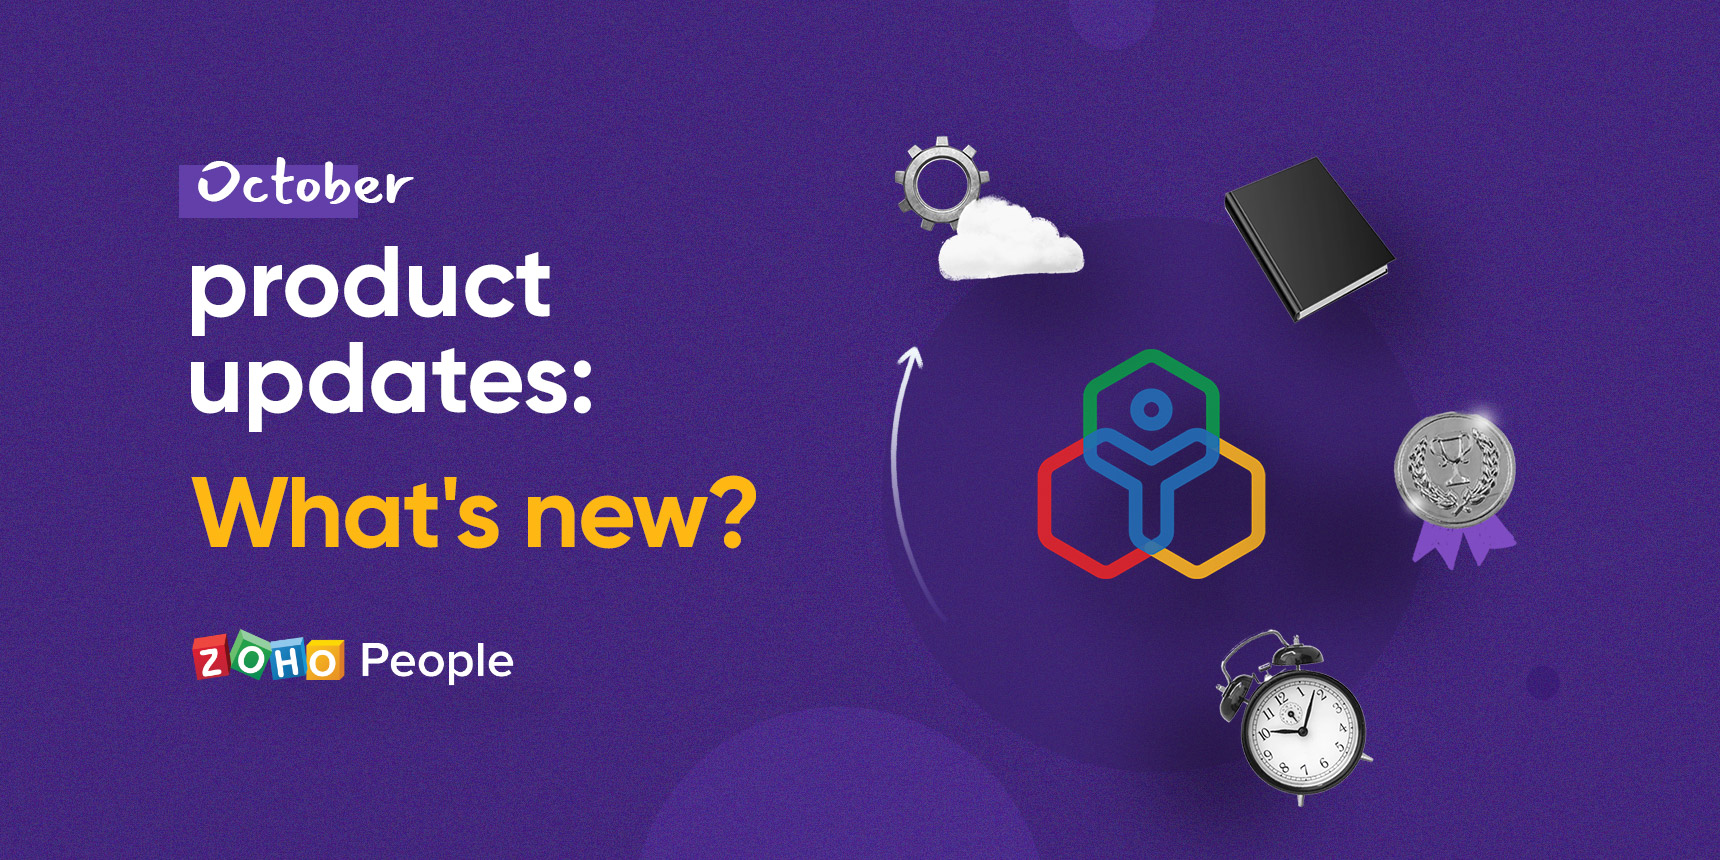 October product updates: What's new in Zoho People?